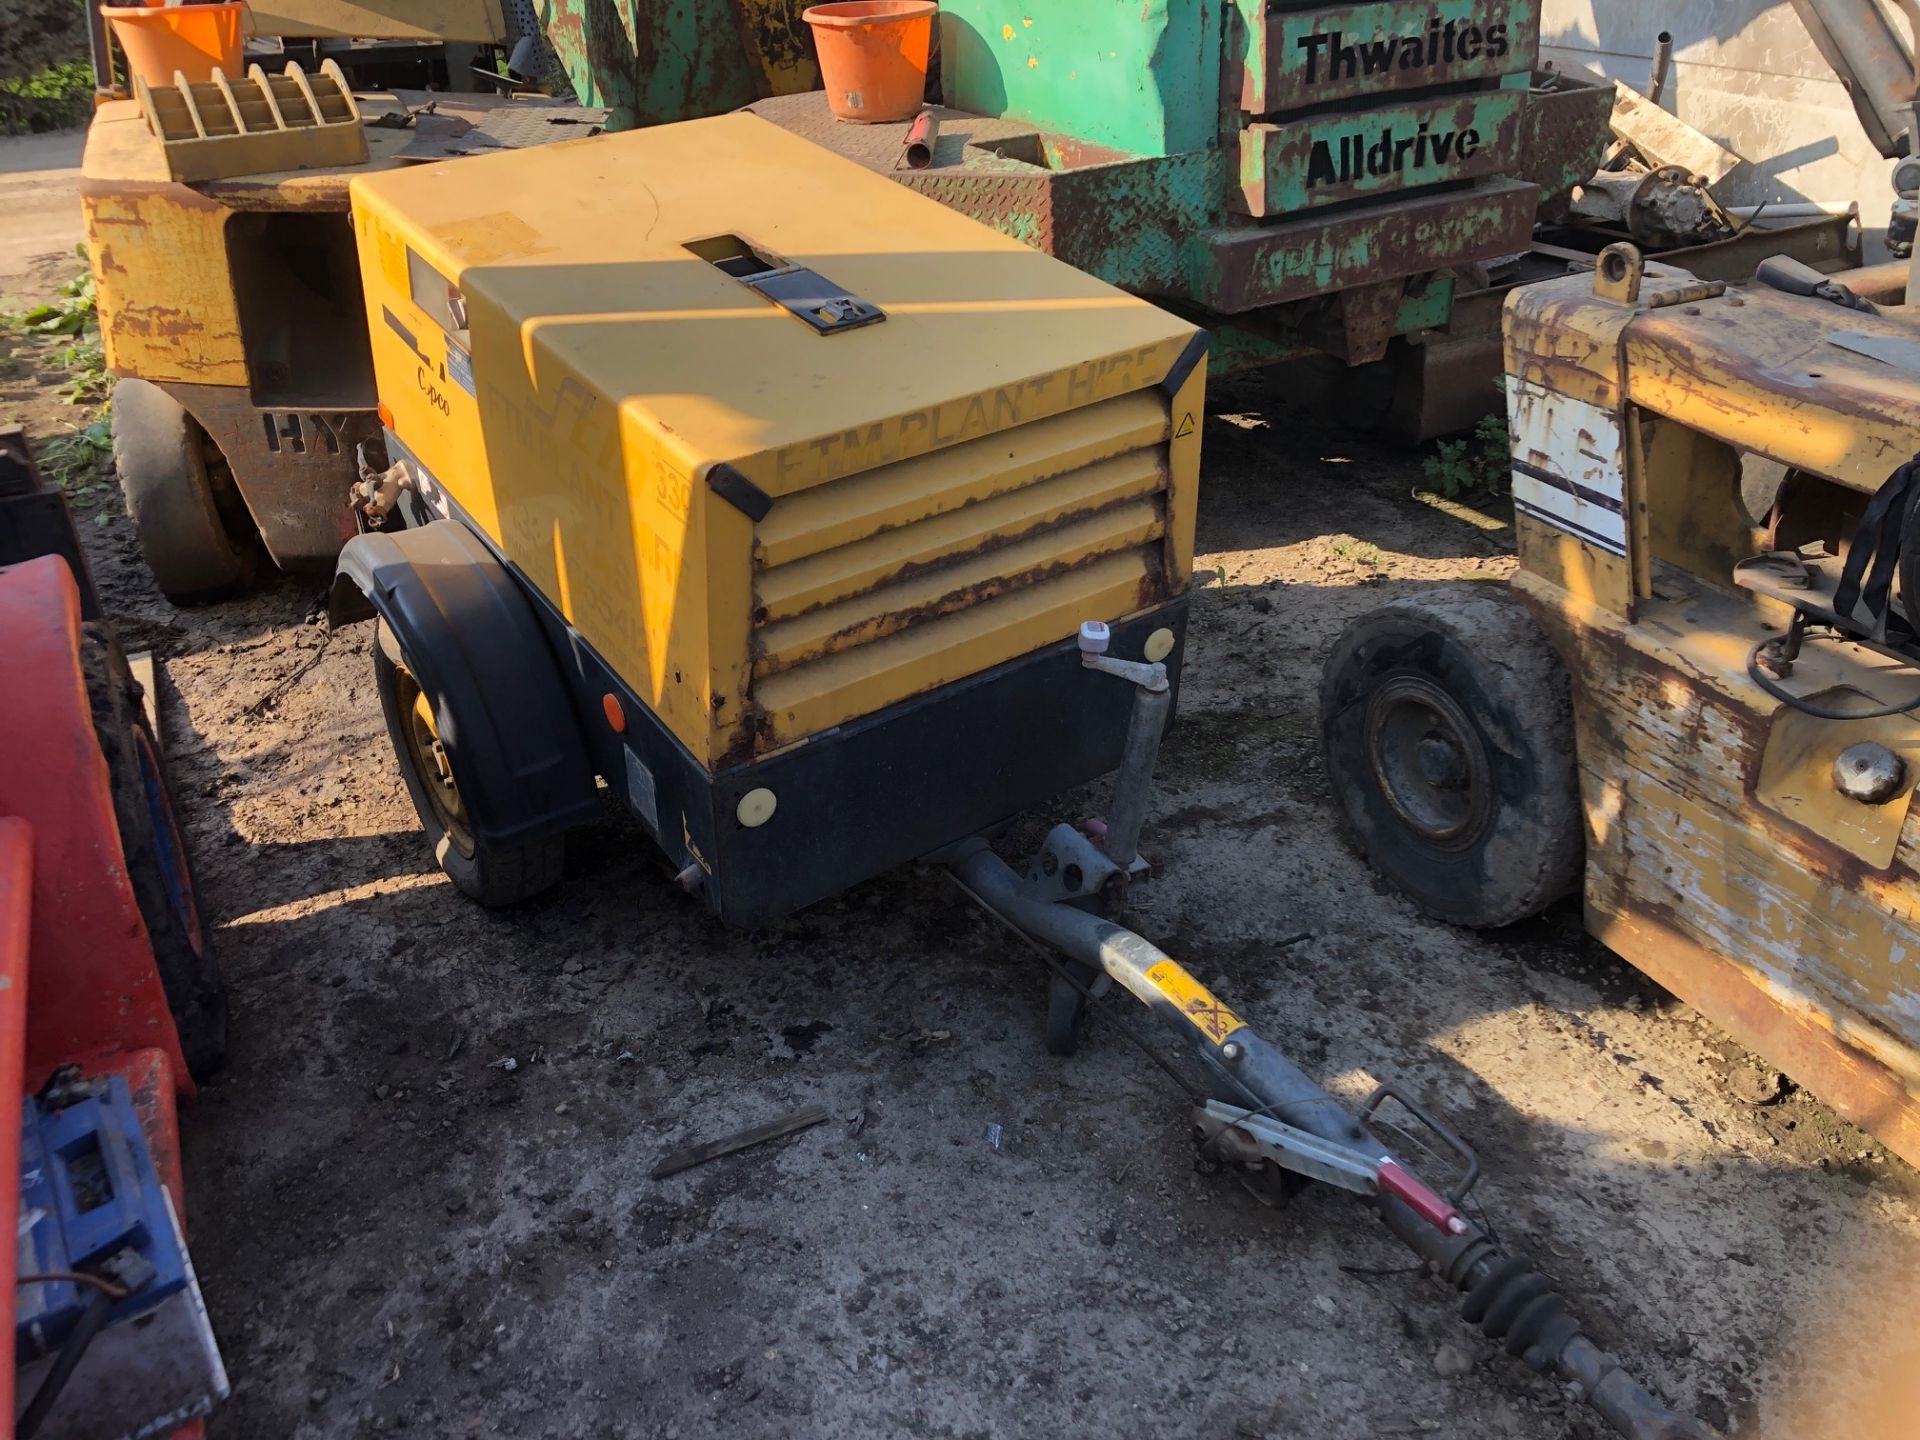 2005 ATLAS COPCO XAS36 COMPRESSOR, TOP MISSING OFF RECEIVER AS PICTURED, YANMAR ENGINE, 1400 HOURS